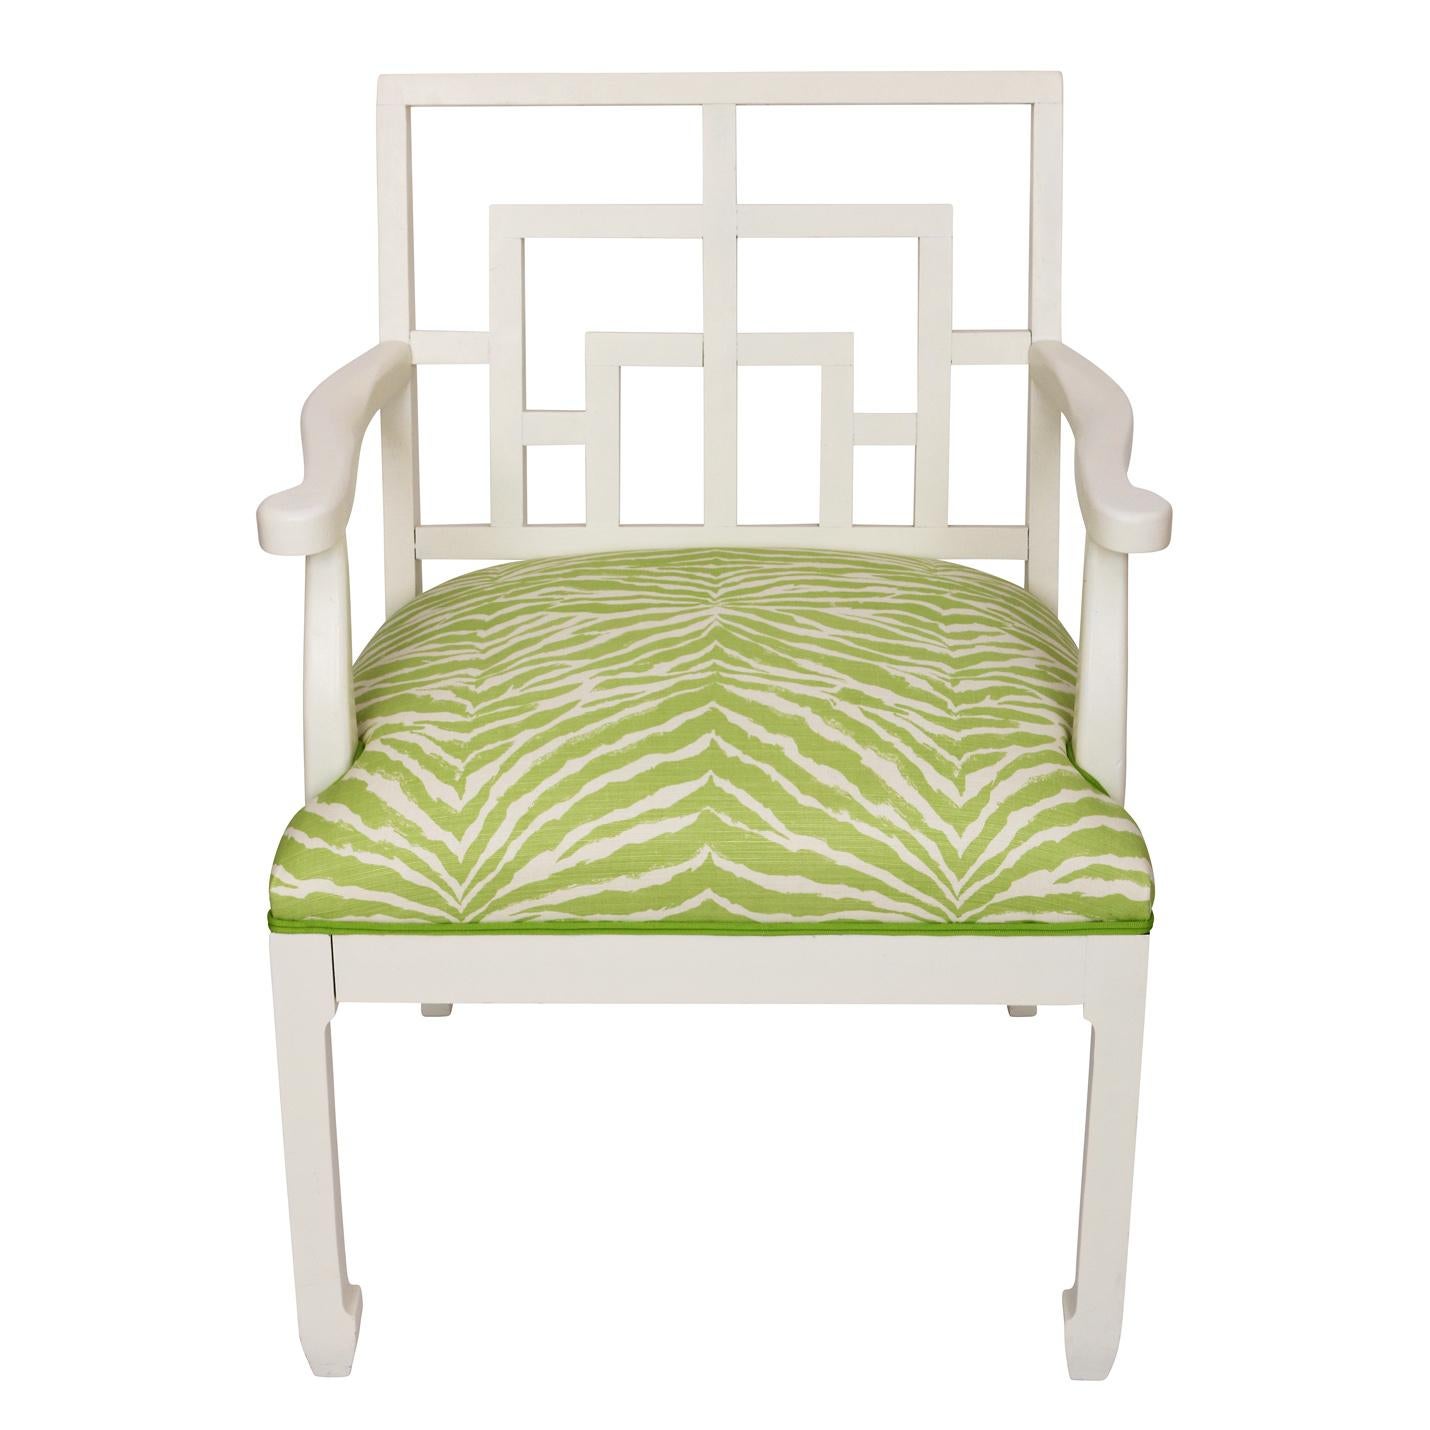 Unknown Pair of Hollywood Regency Painted Chair in Quadrille Green Zebra Fabric